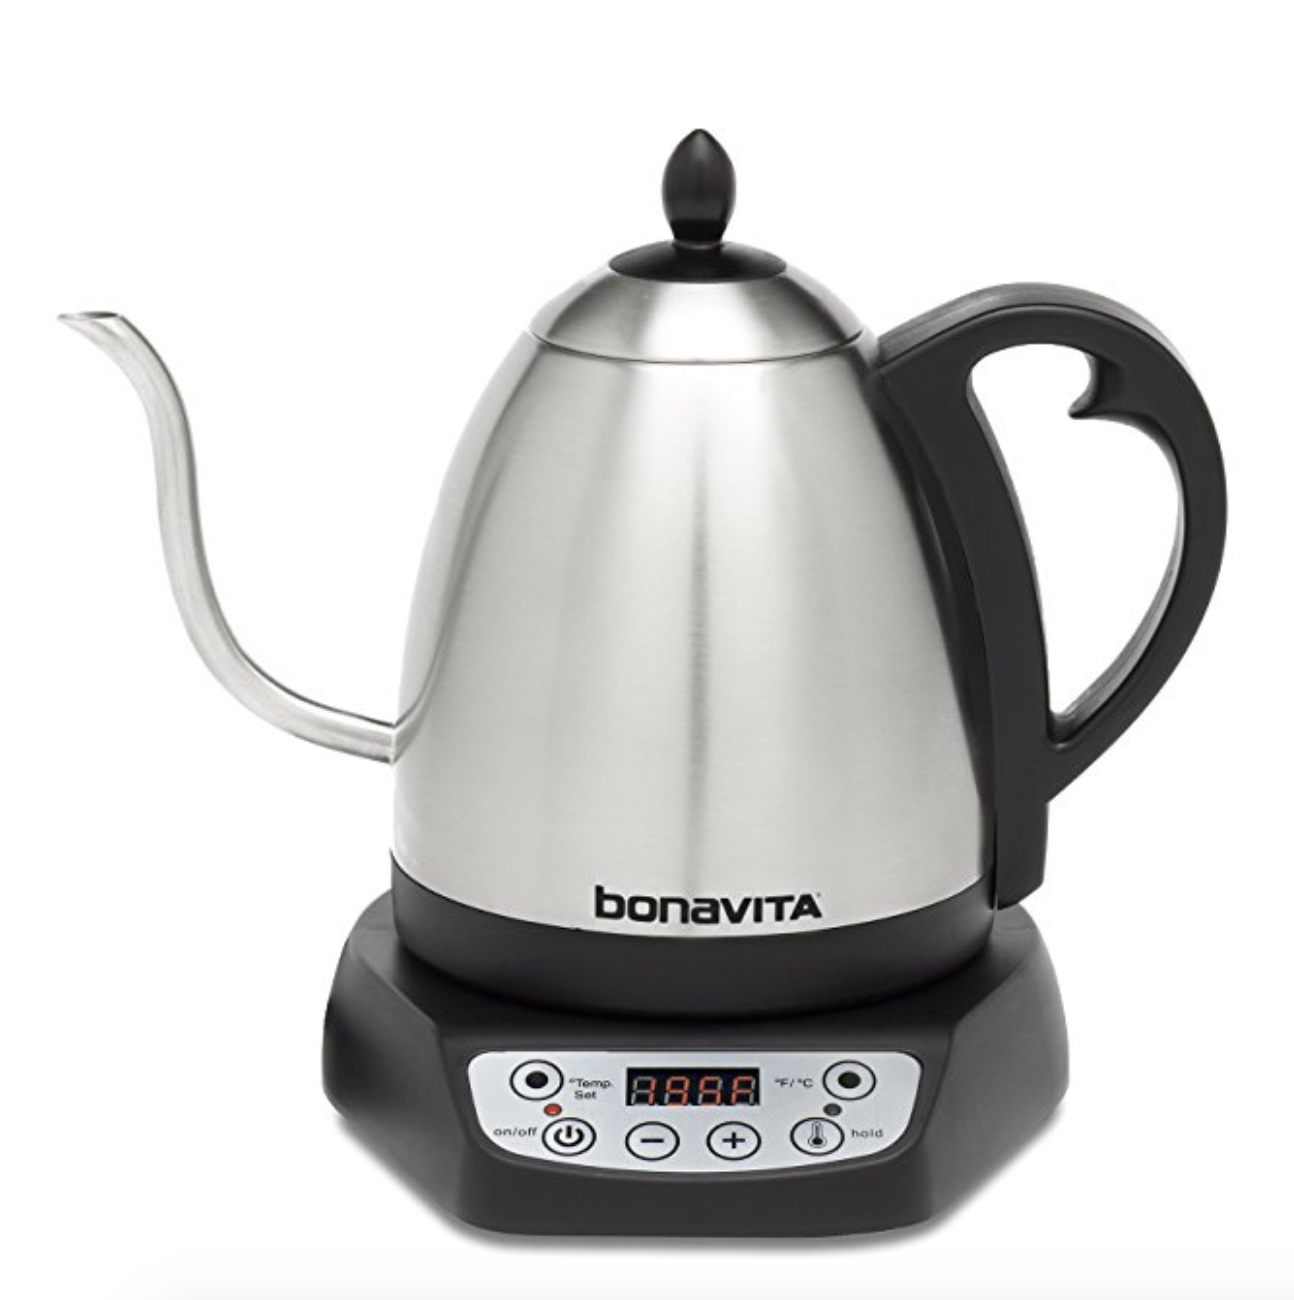 Bonavita Electric Kettle    Another product we use every single day! My boyfriend likes it because you can set the temperature to an  exact  degree (206 for the perfect pour over coffee), and I like it because it makes me feel fancy every time I make a hot drink (which is very often). It’s also speedy and looks good on your countertop.